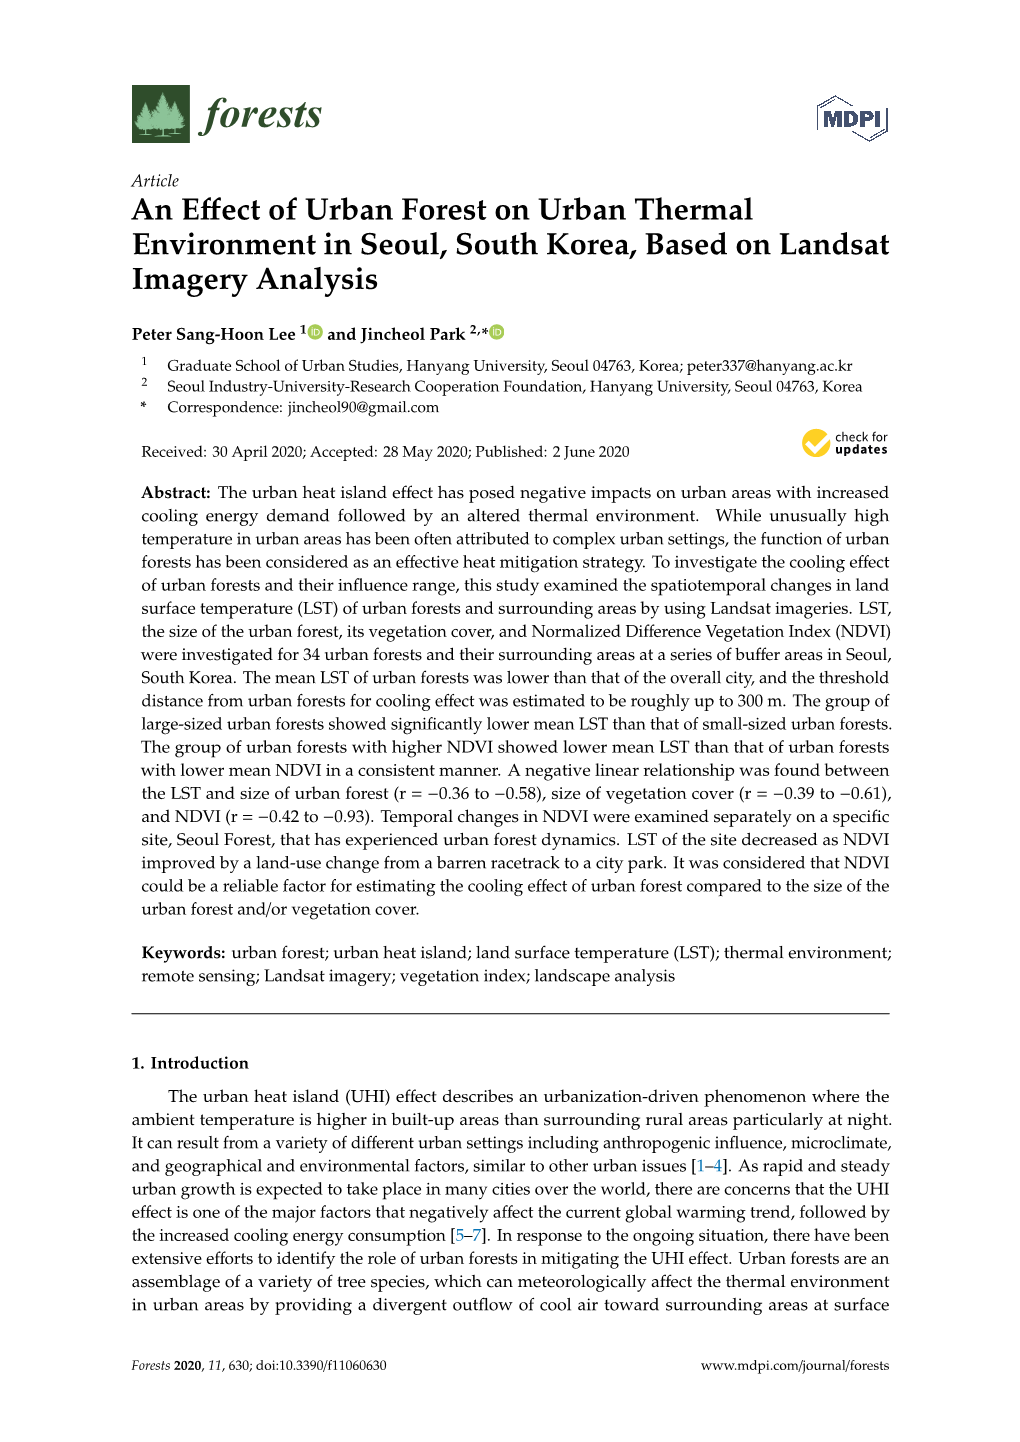 An Effect of Urban Forest on Urban Thermal Environment in Seoul, South Korea, Based on Landsat Imagery Analysis